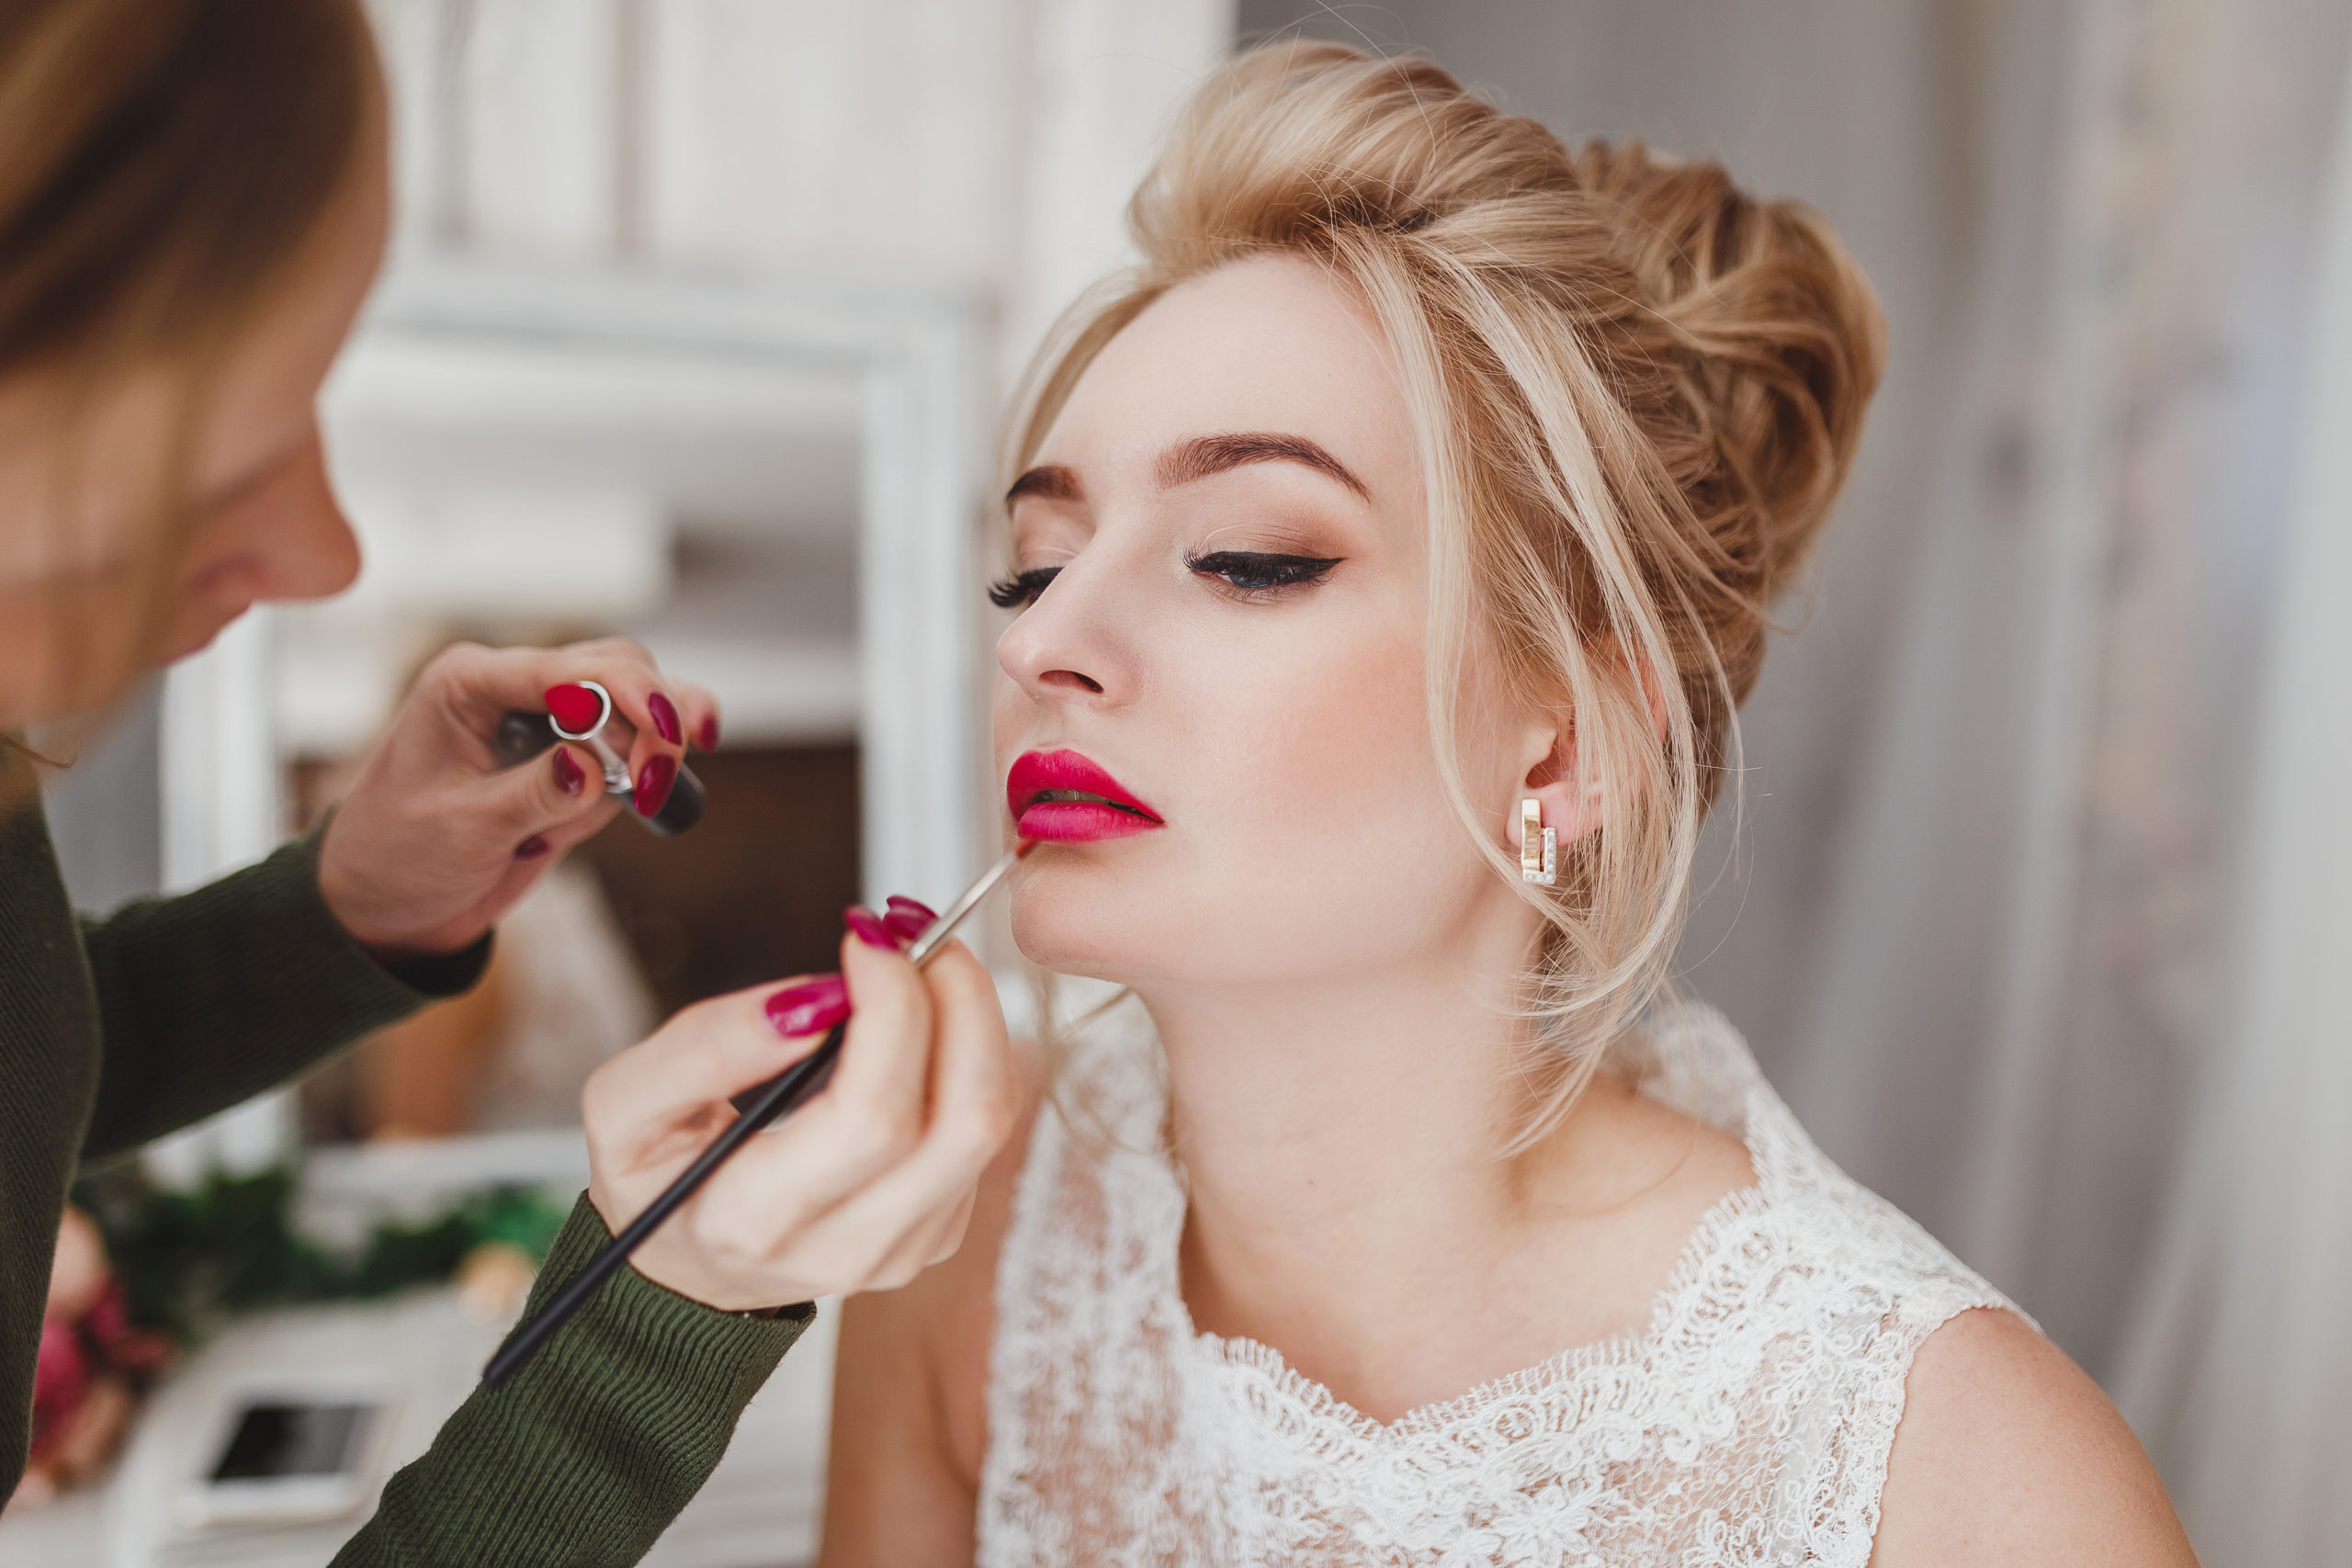 Makeup And Hairstyling For Weddings